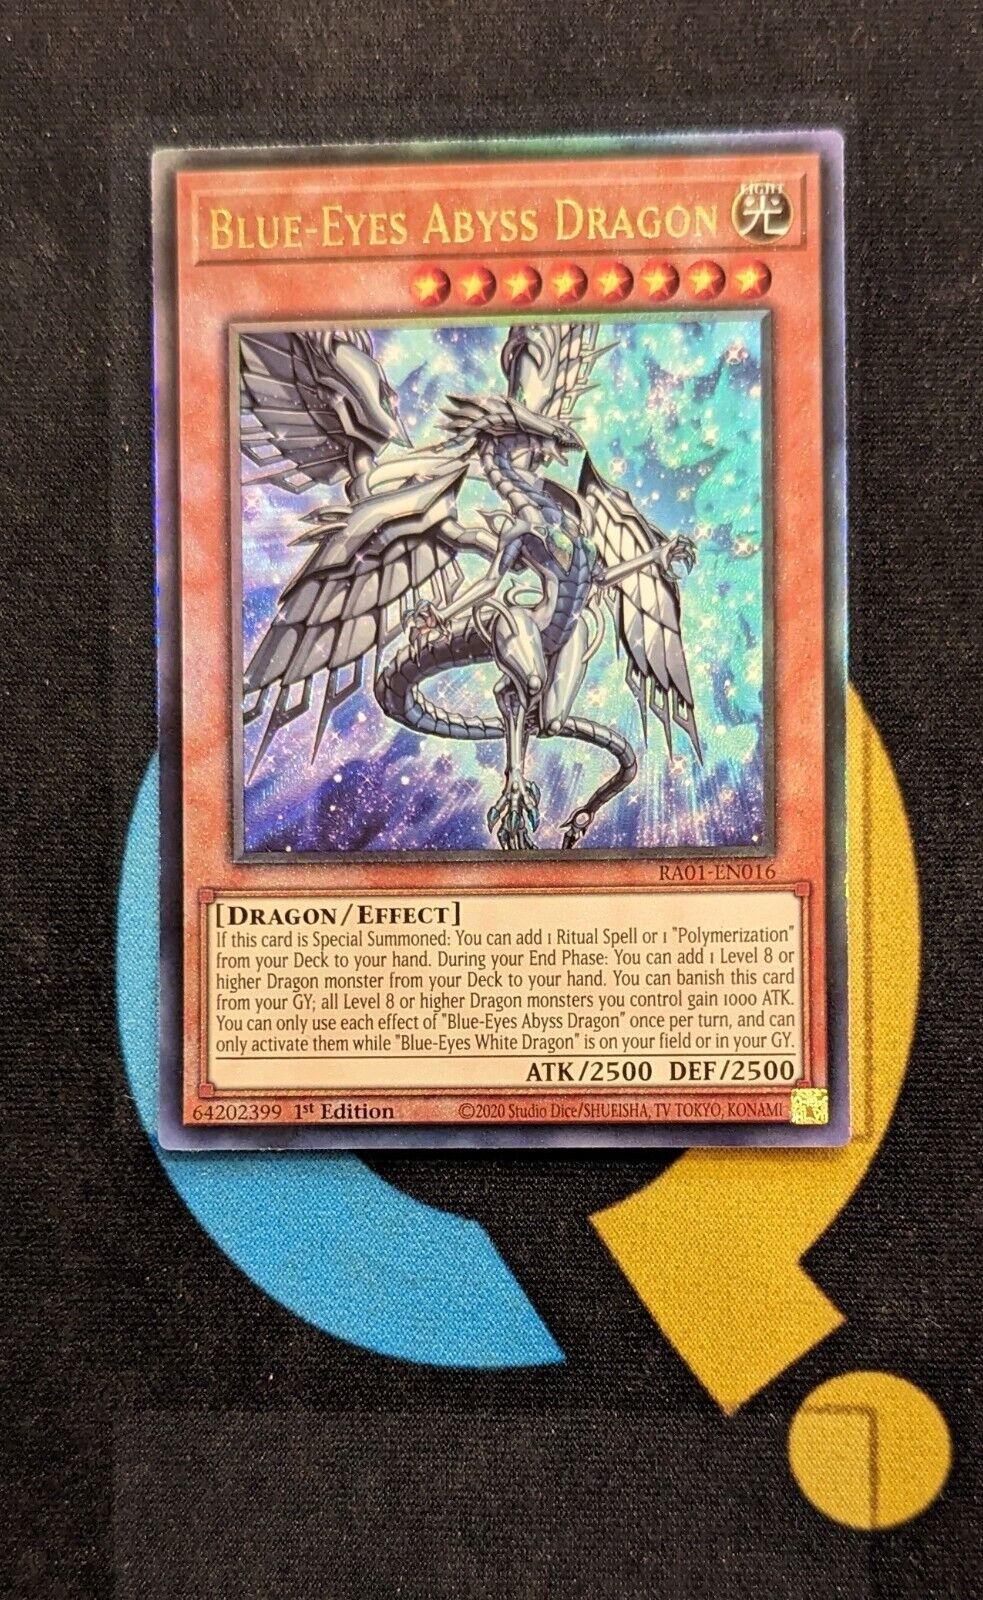 RA01-EN016 Blue-Eyes Abyss Dragon Prismatic Ultimate Rare 1st Edition YuGIOh